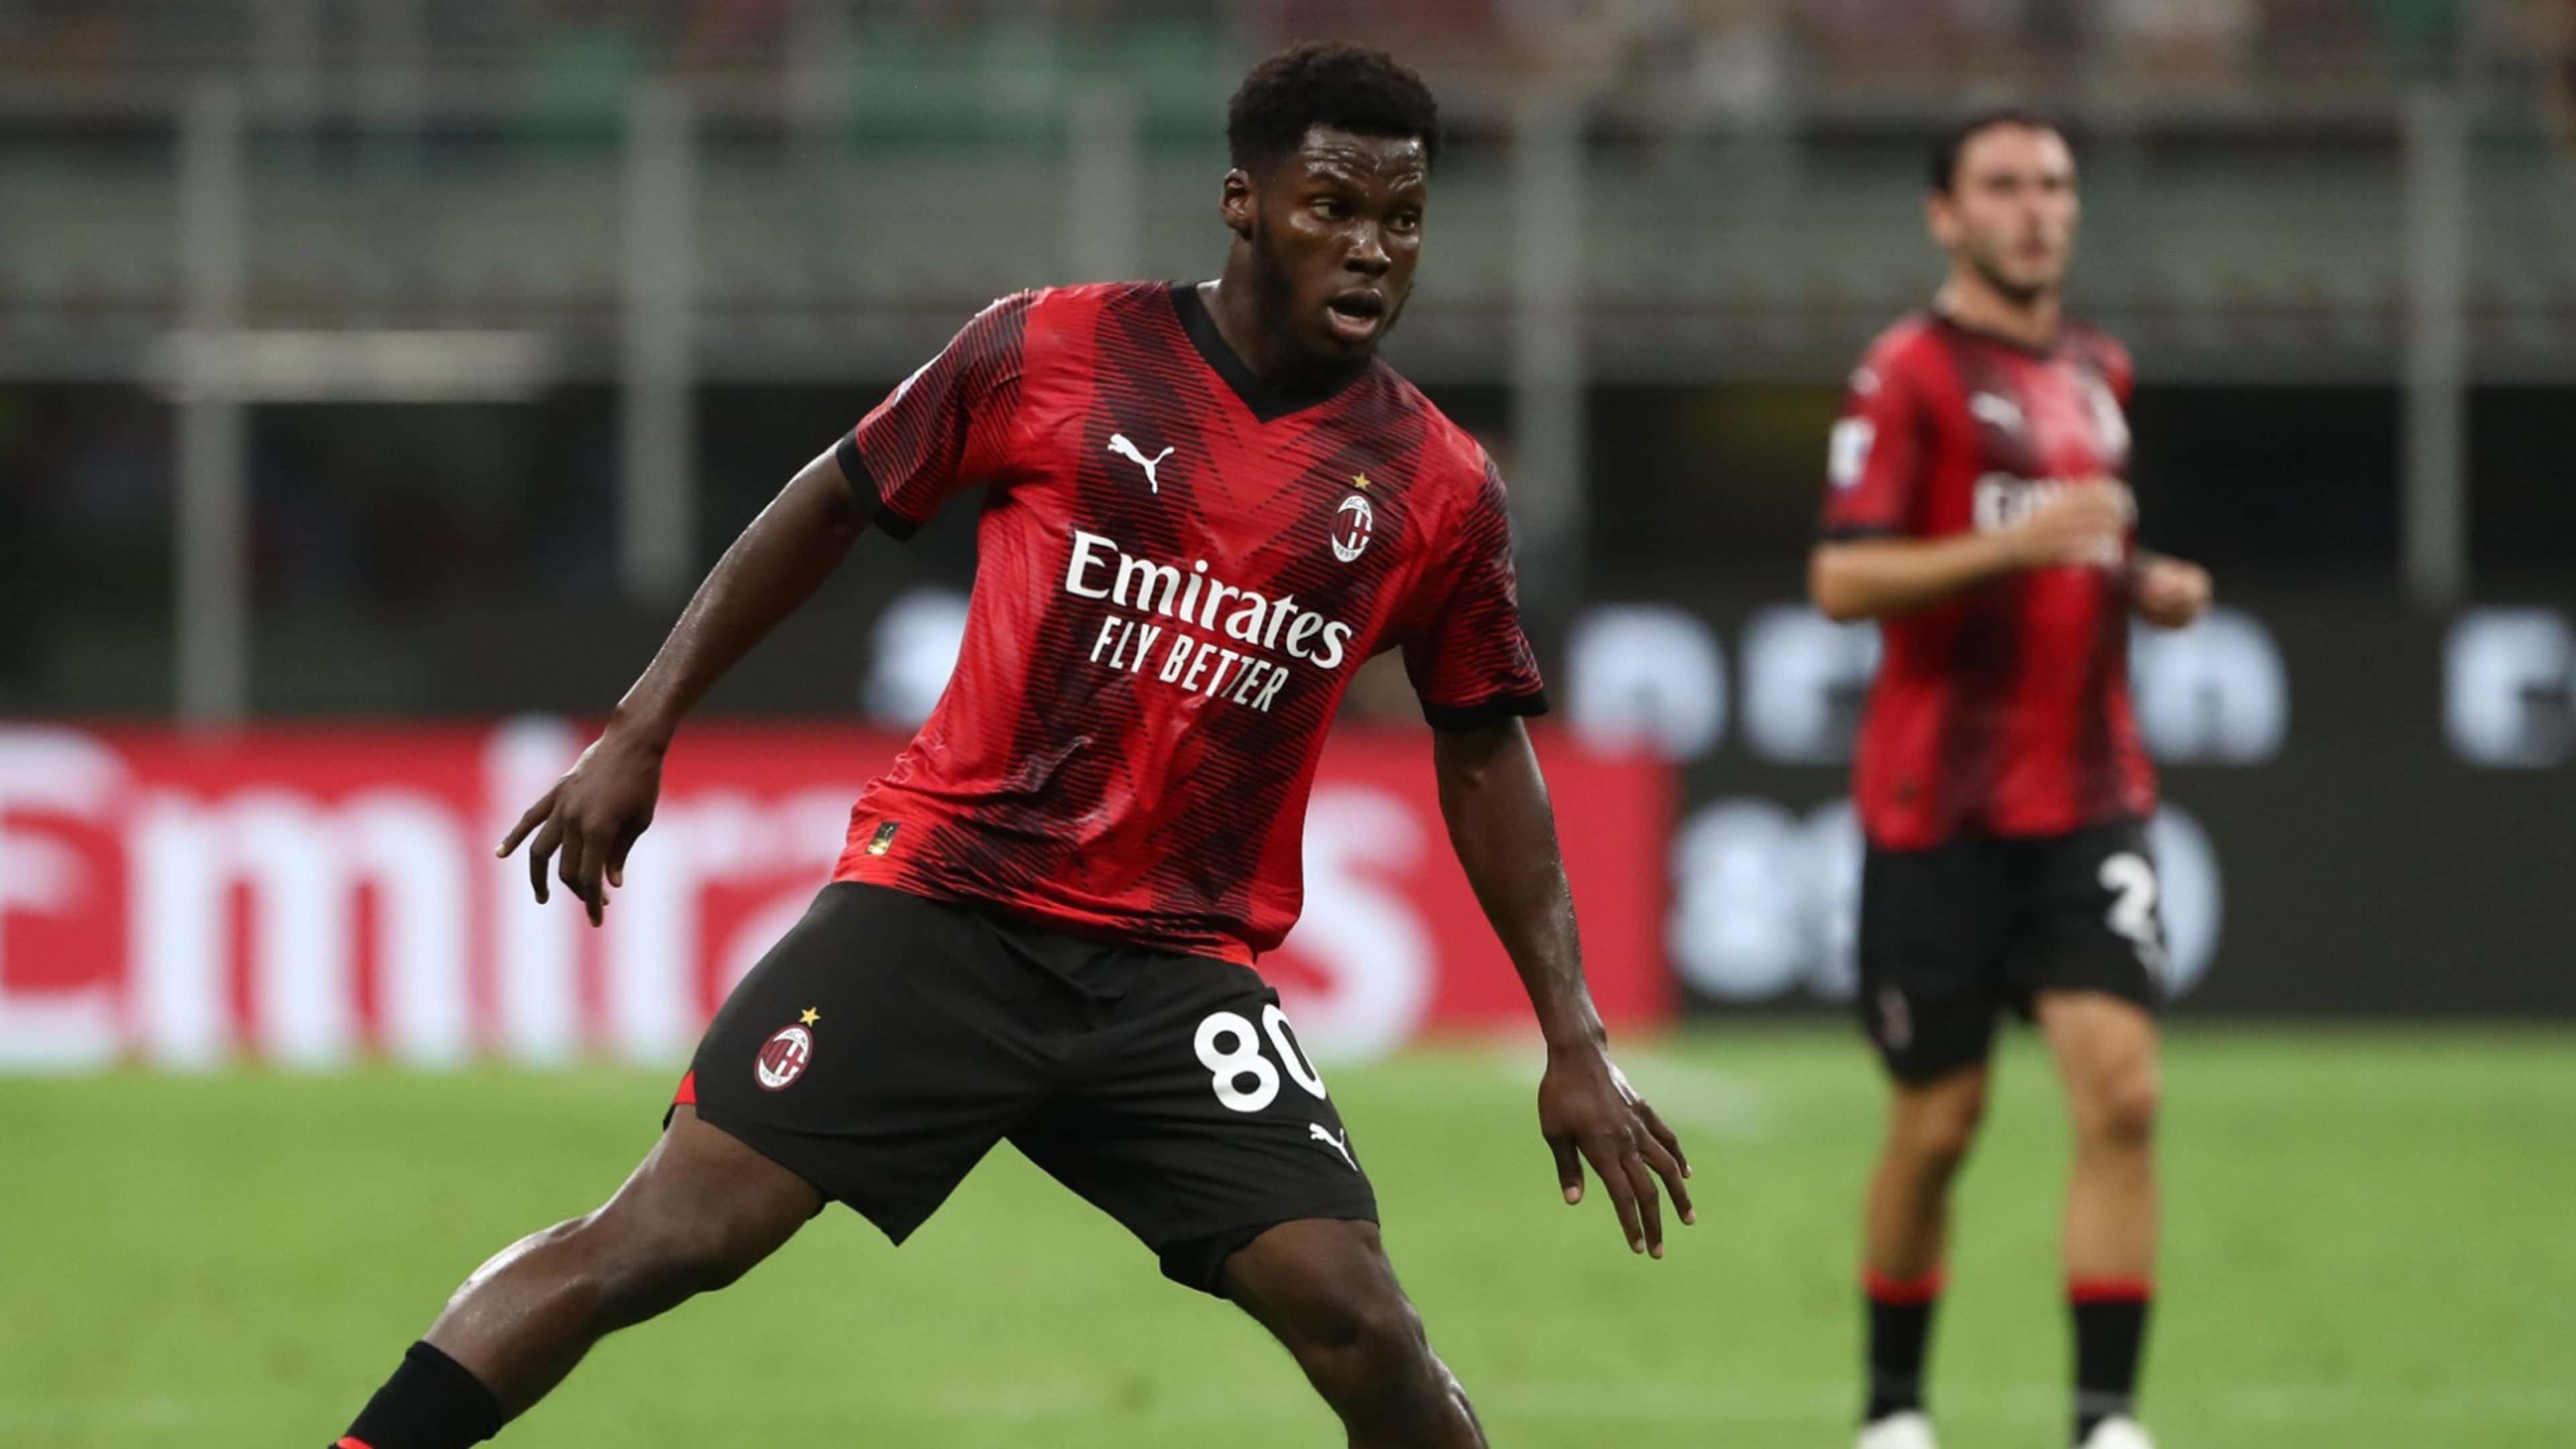 He is a complete player' - Milan boss Stefano Pioli is blushing over USMNT  star Yunus Musah | Goal.com